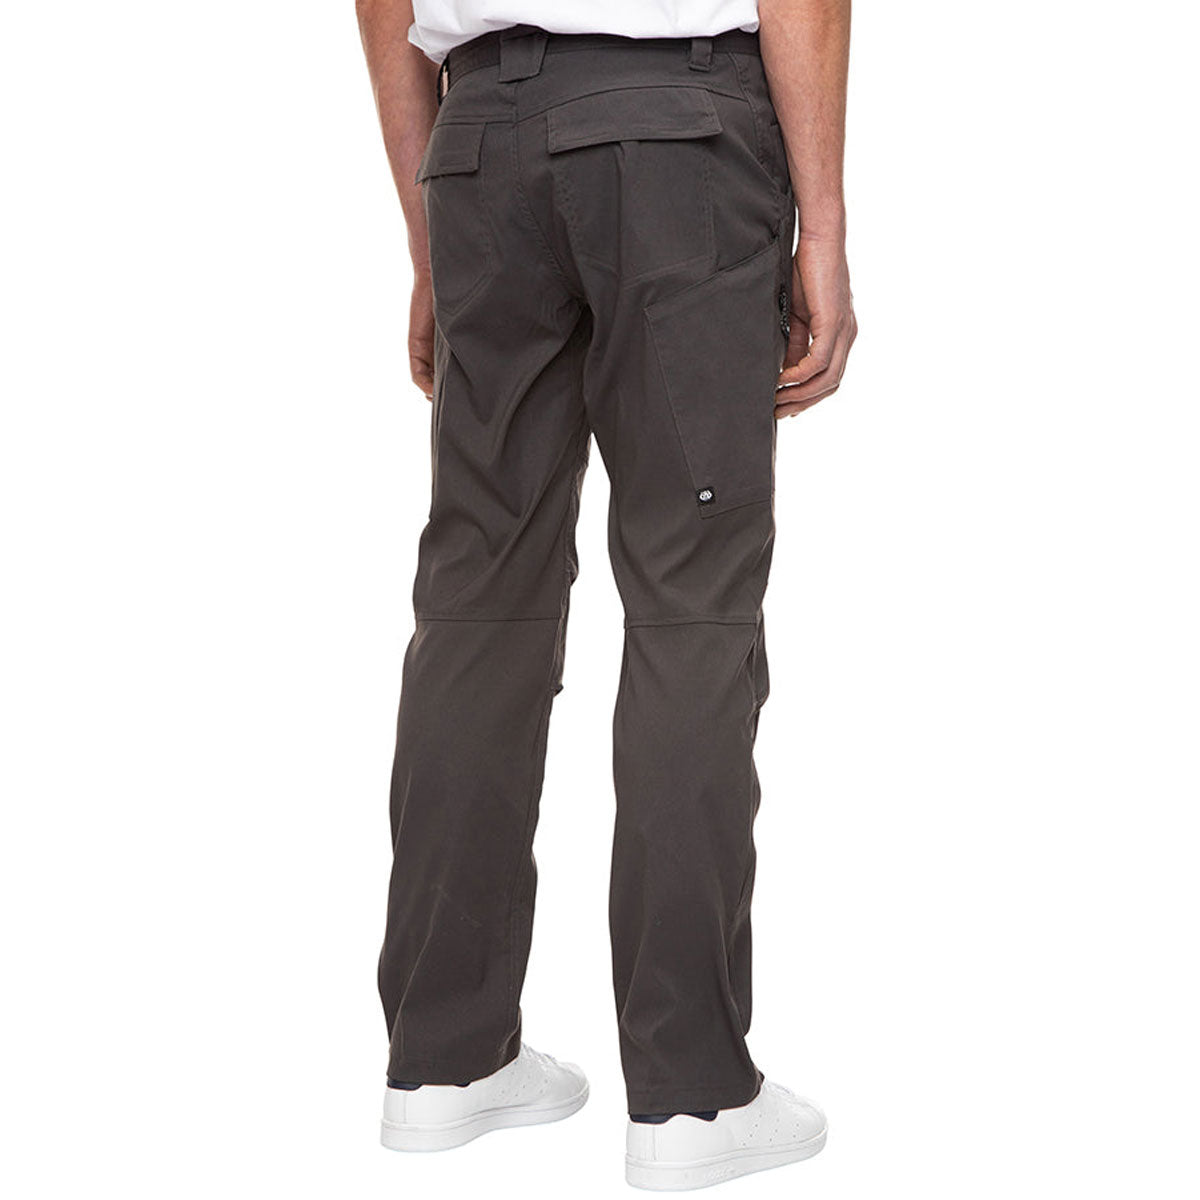 686 Anything Cargo Relaxed Pants - Charcoal image 2